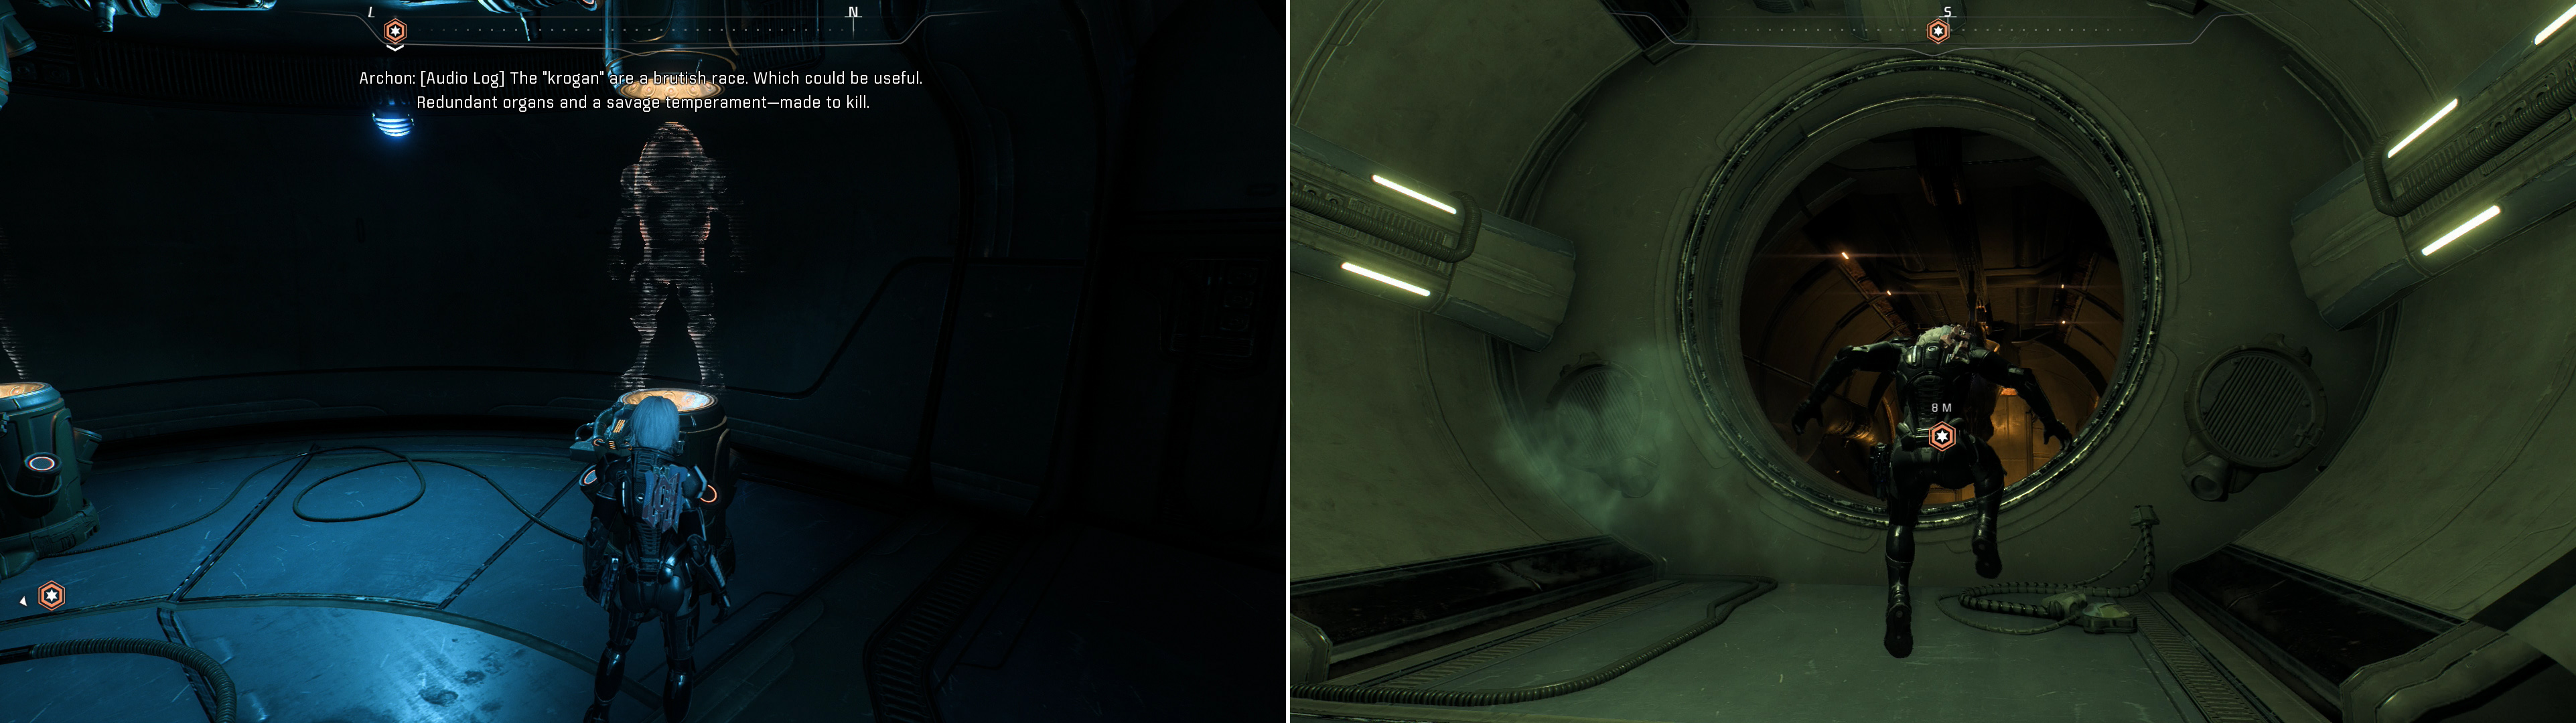 Examine some displays to witness indisputable evidence of the Archons plans for the Milky Way races (left) then leap into a circular entrace leading to the maintenance tunnels (right).